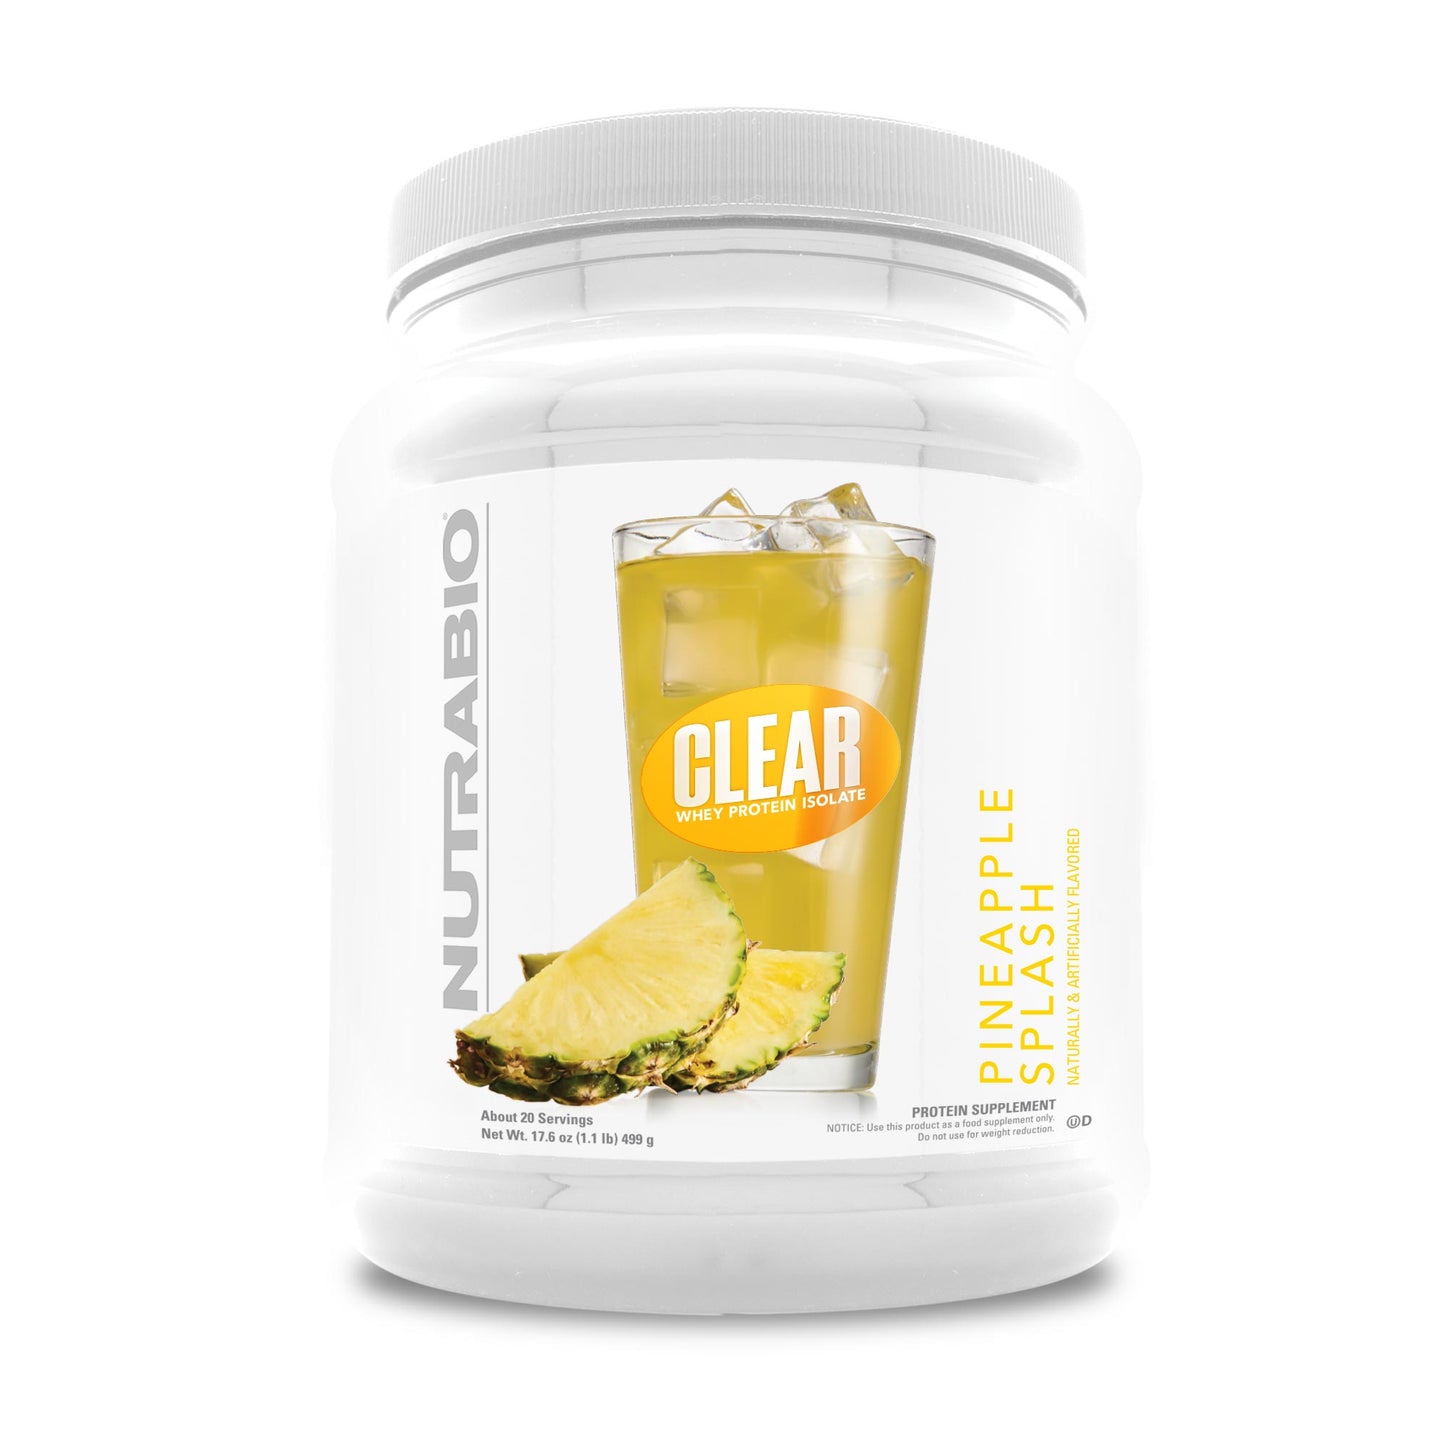 Nutrabio Clear Whey Protein Isolate